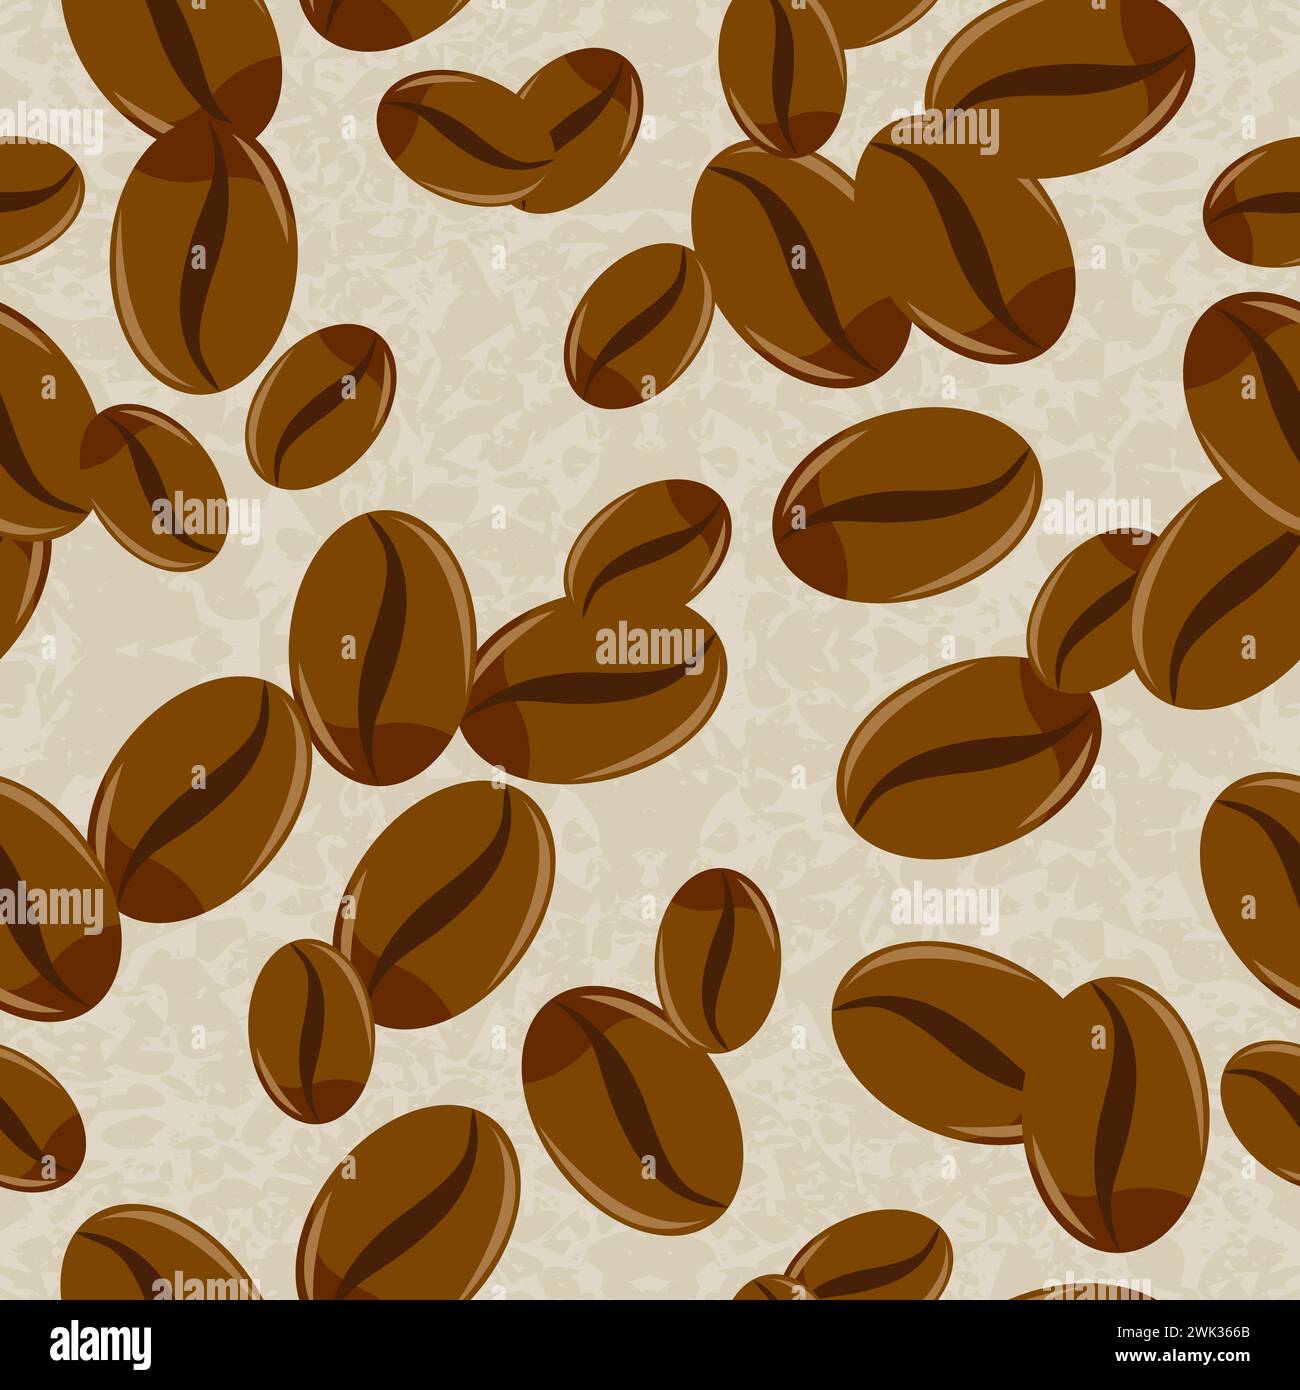 Seamless pattern wallpaper, coffee beans design .  Seamless texture. realistic coffee grains on a light background. Stock Photo